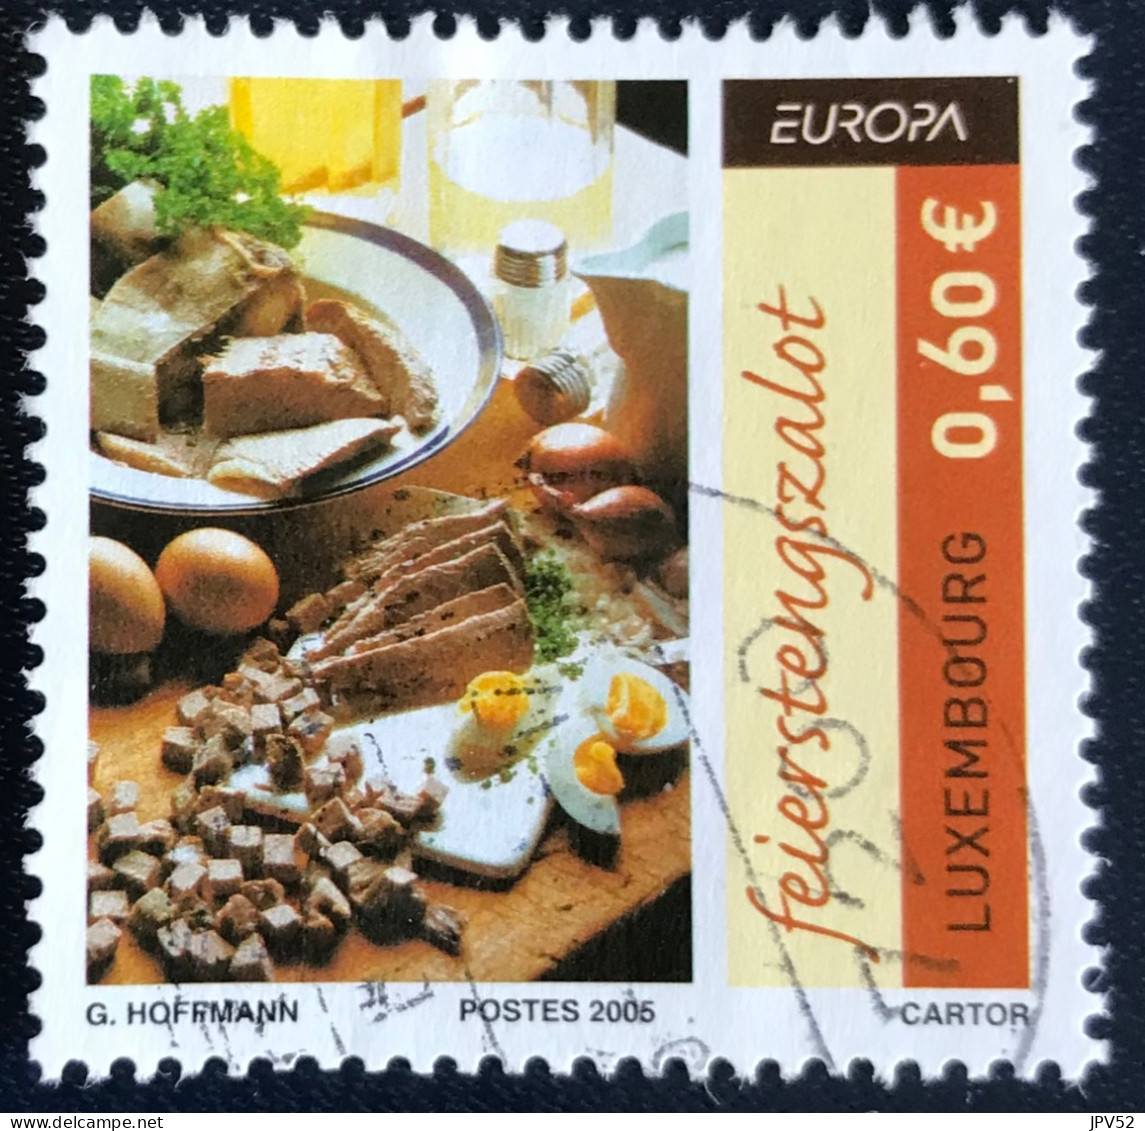 Luxembourg - Luxemburg - C18/34 - 2005 - (°)used - Michel 1674 - Europa - Gastronomie - Usados